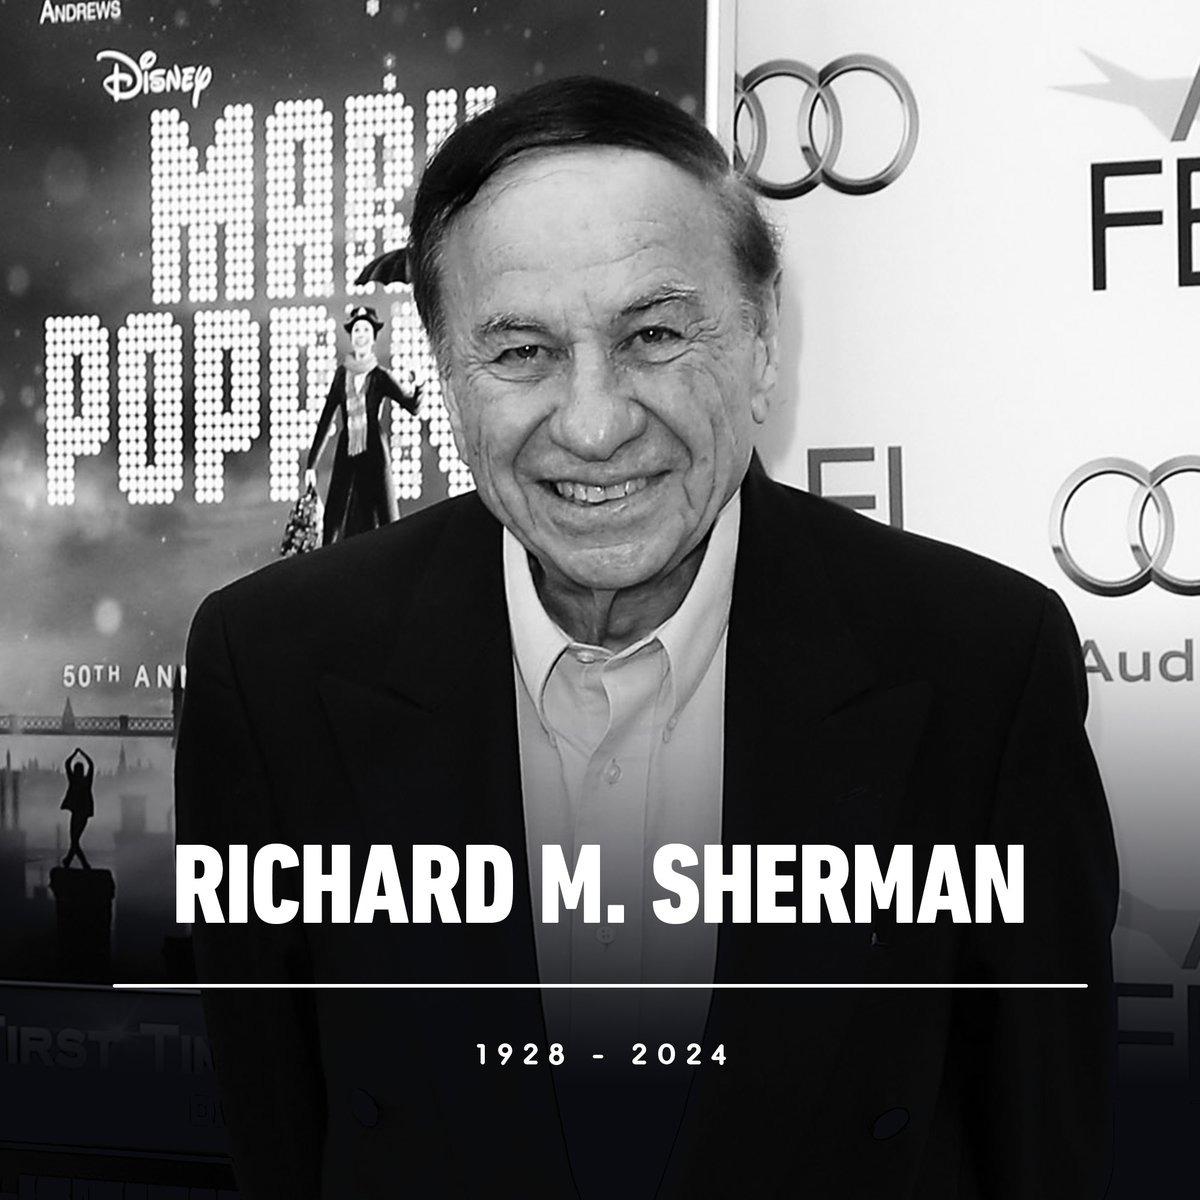 Richard M. Sherman, one half of the Sherman Brothers duo and co-writer of legendary Disney songs like 'Supercalifragilisticexpialidocious' from Mary Poppins and the titular ride theme for It's a Small World, has died at the age of 95.